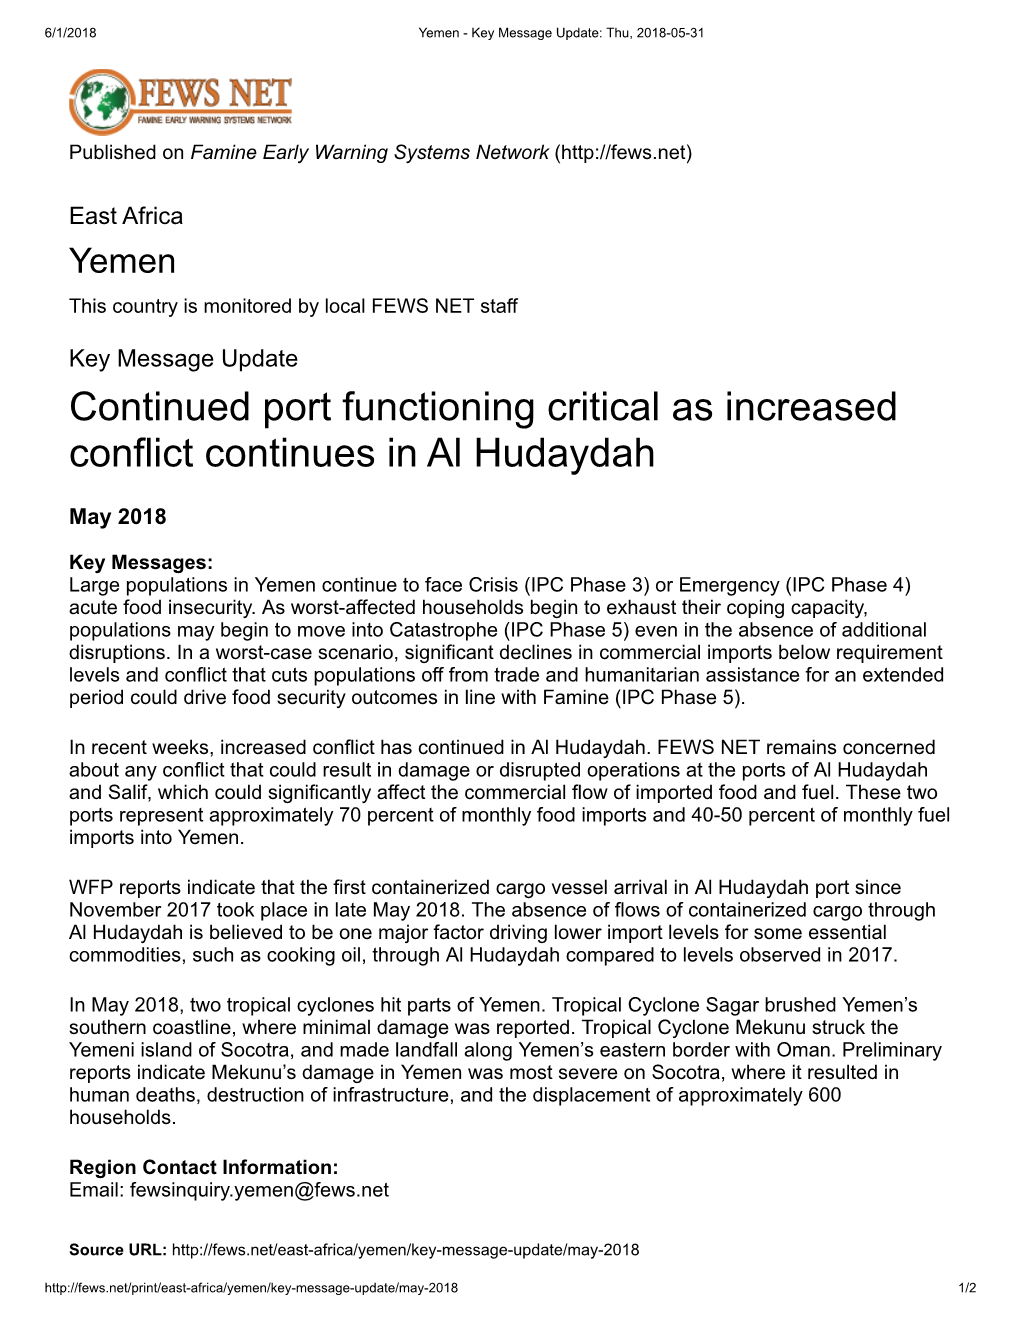 Continued Port Functioning Critical As Increased Conflict Continues in Al Hudaydah